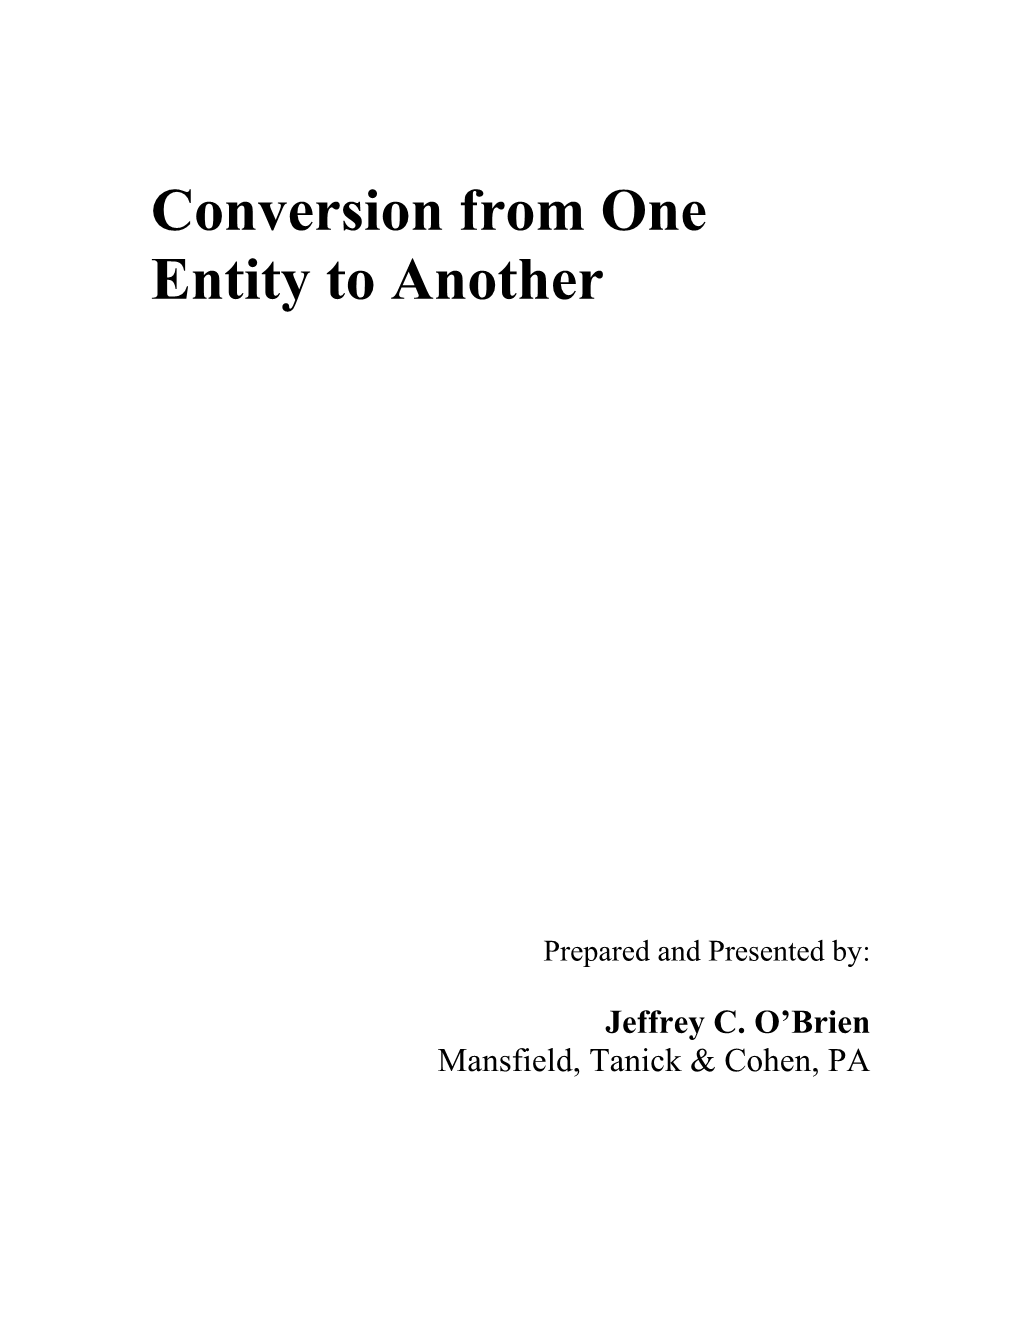 Conversion from One Entity to Another